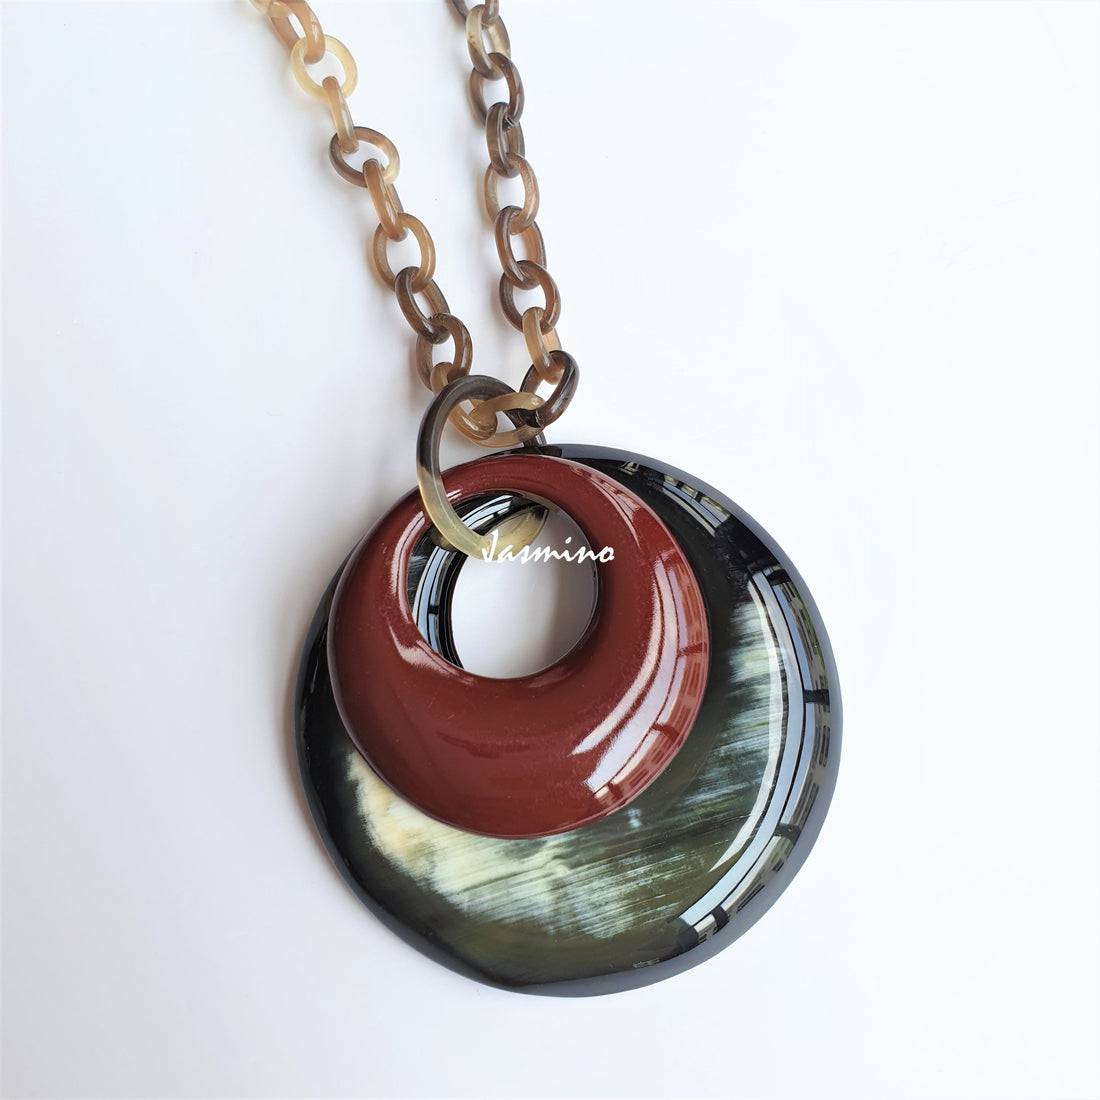 Unique handmade double circle pendant features black and brown made of natural buffalo horn